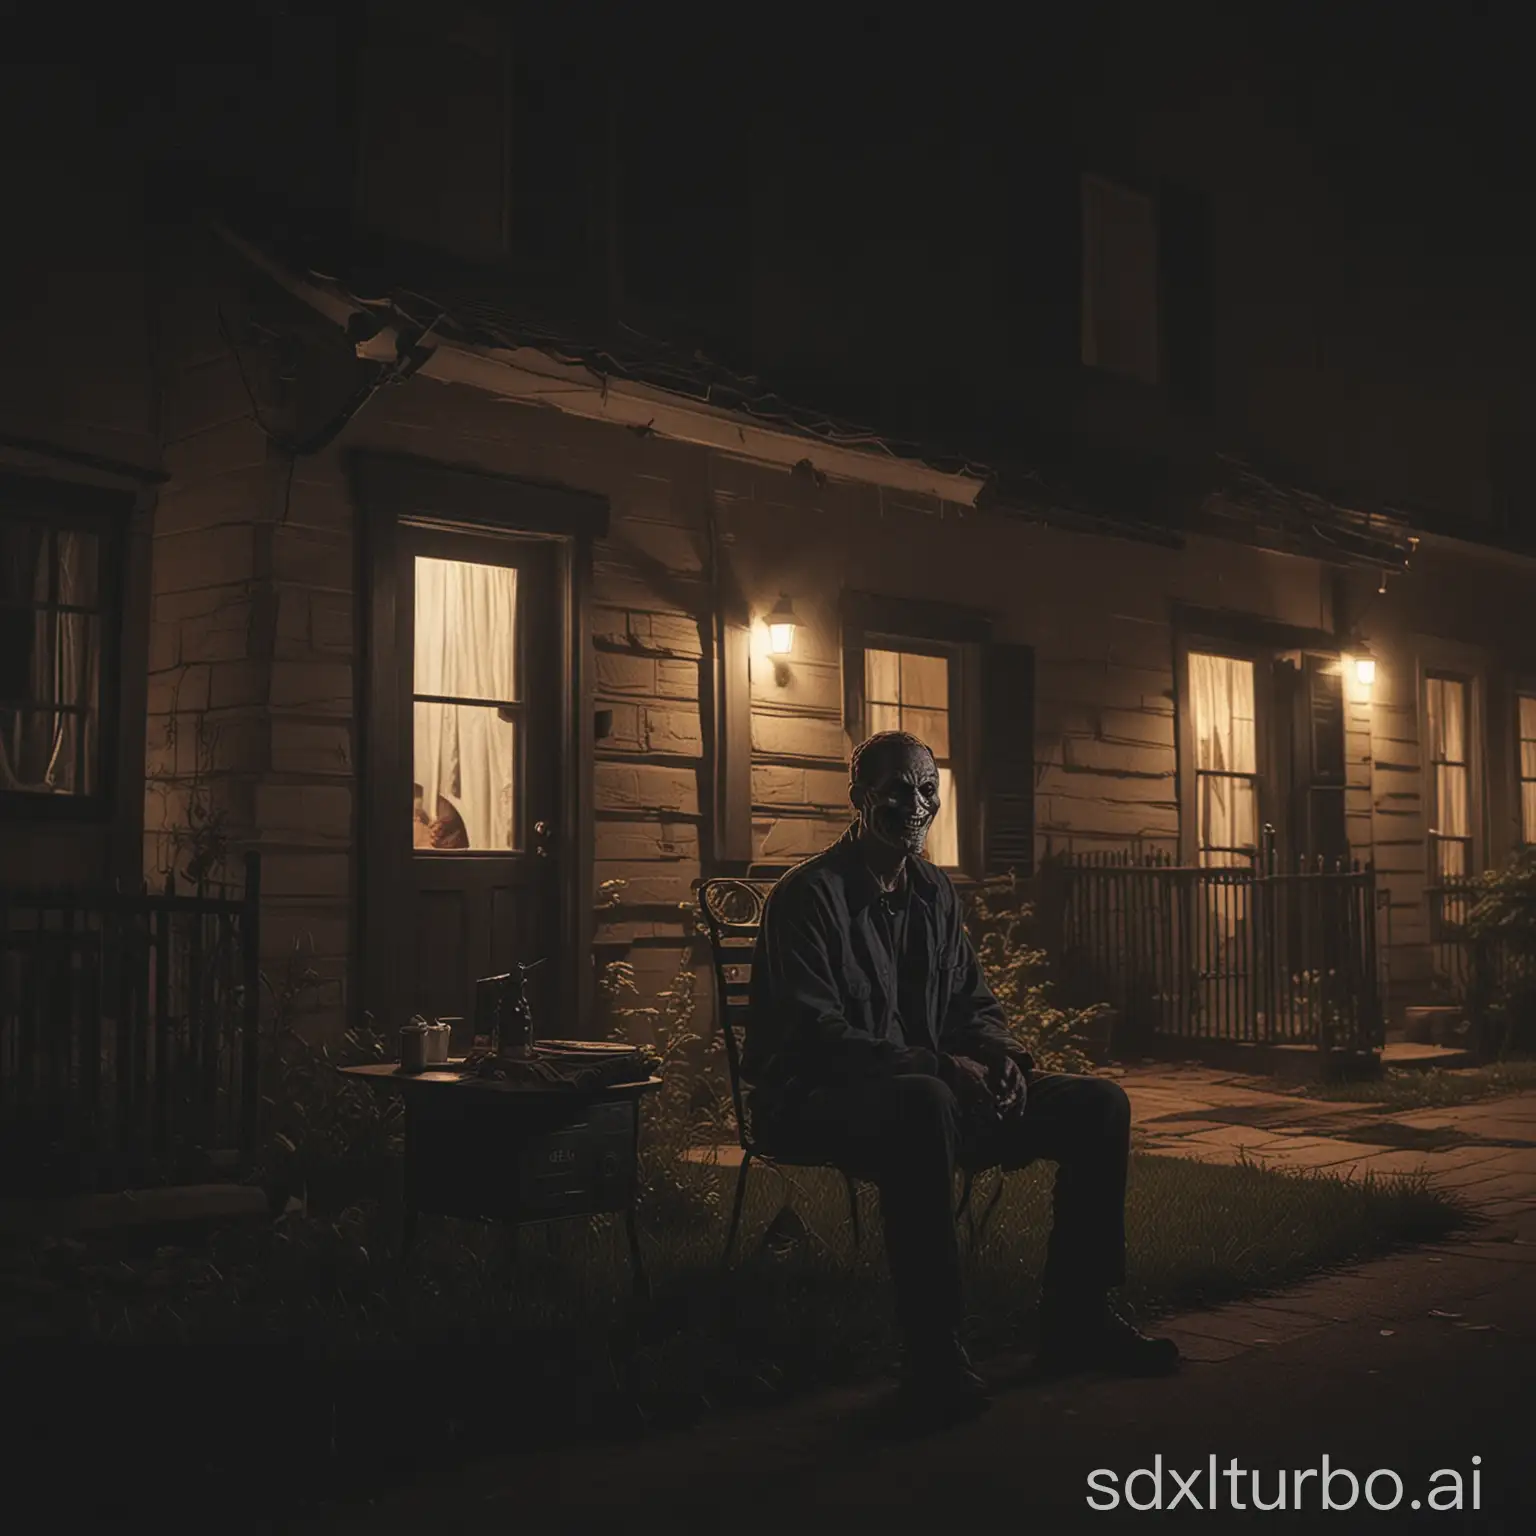 Create a square, 1:1 aspect ratio, high definition, image of a true scary neighbor story. The image must be photorealistic, scary, show a man sitting standing in front of his house, dimly lit, man with a wide evil smile, man with big wide evil grin, crazy smile, man with very wide smile, kidnapper man, murderer man, stalker man, shady, crazy neighbour, mad man, alone, only person, vivid colors, night lights, cinematic, catchy, must pop and catch attention, wide shot. Not a monster, no monstrous faces, no blood, no gore, no horror.